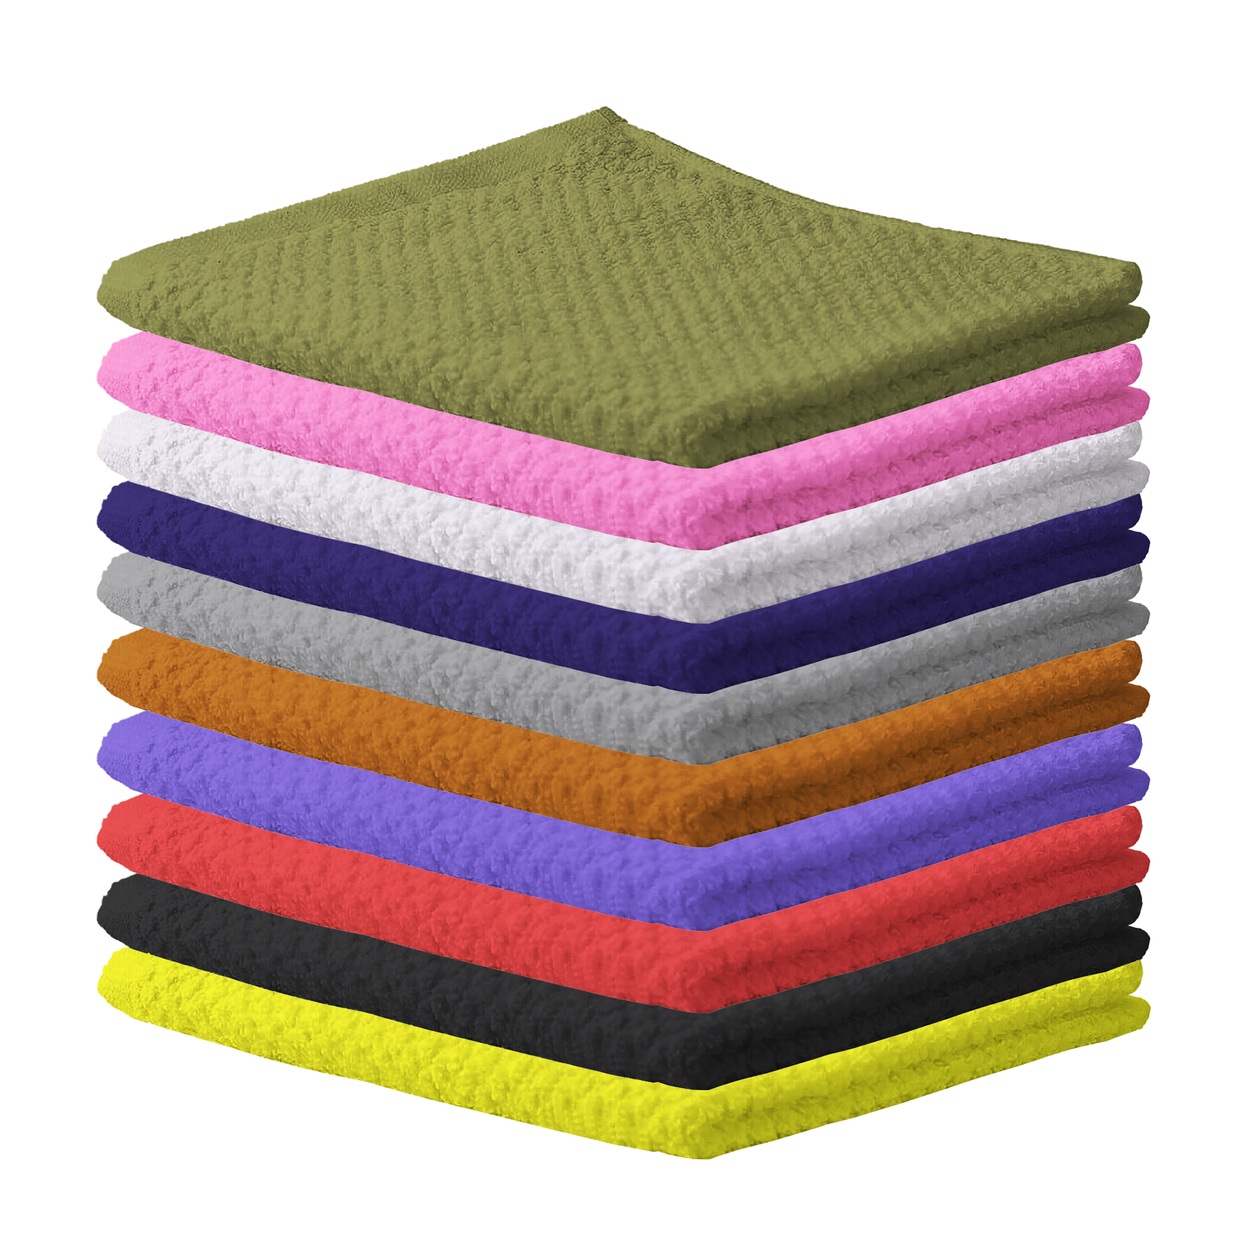 40-Pack: Multipurpose Super Absorbent Ultra Soft 100% Cotton Ring Spun Stitched Wash Cloths